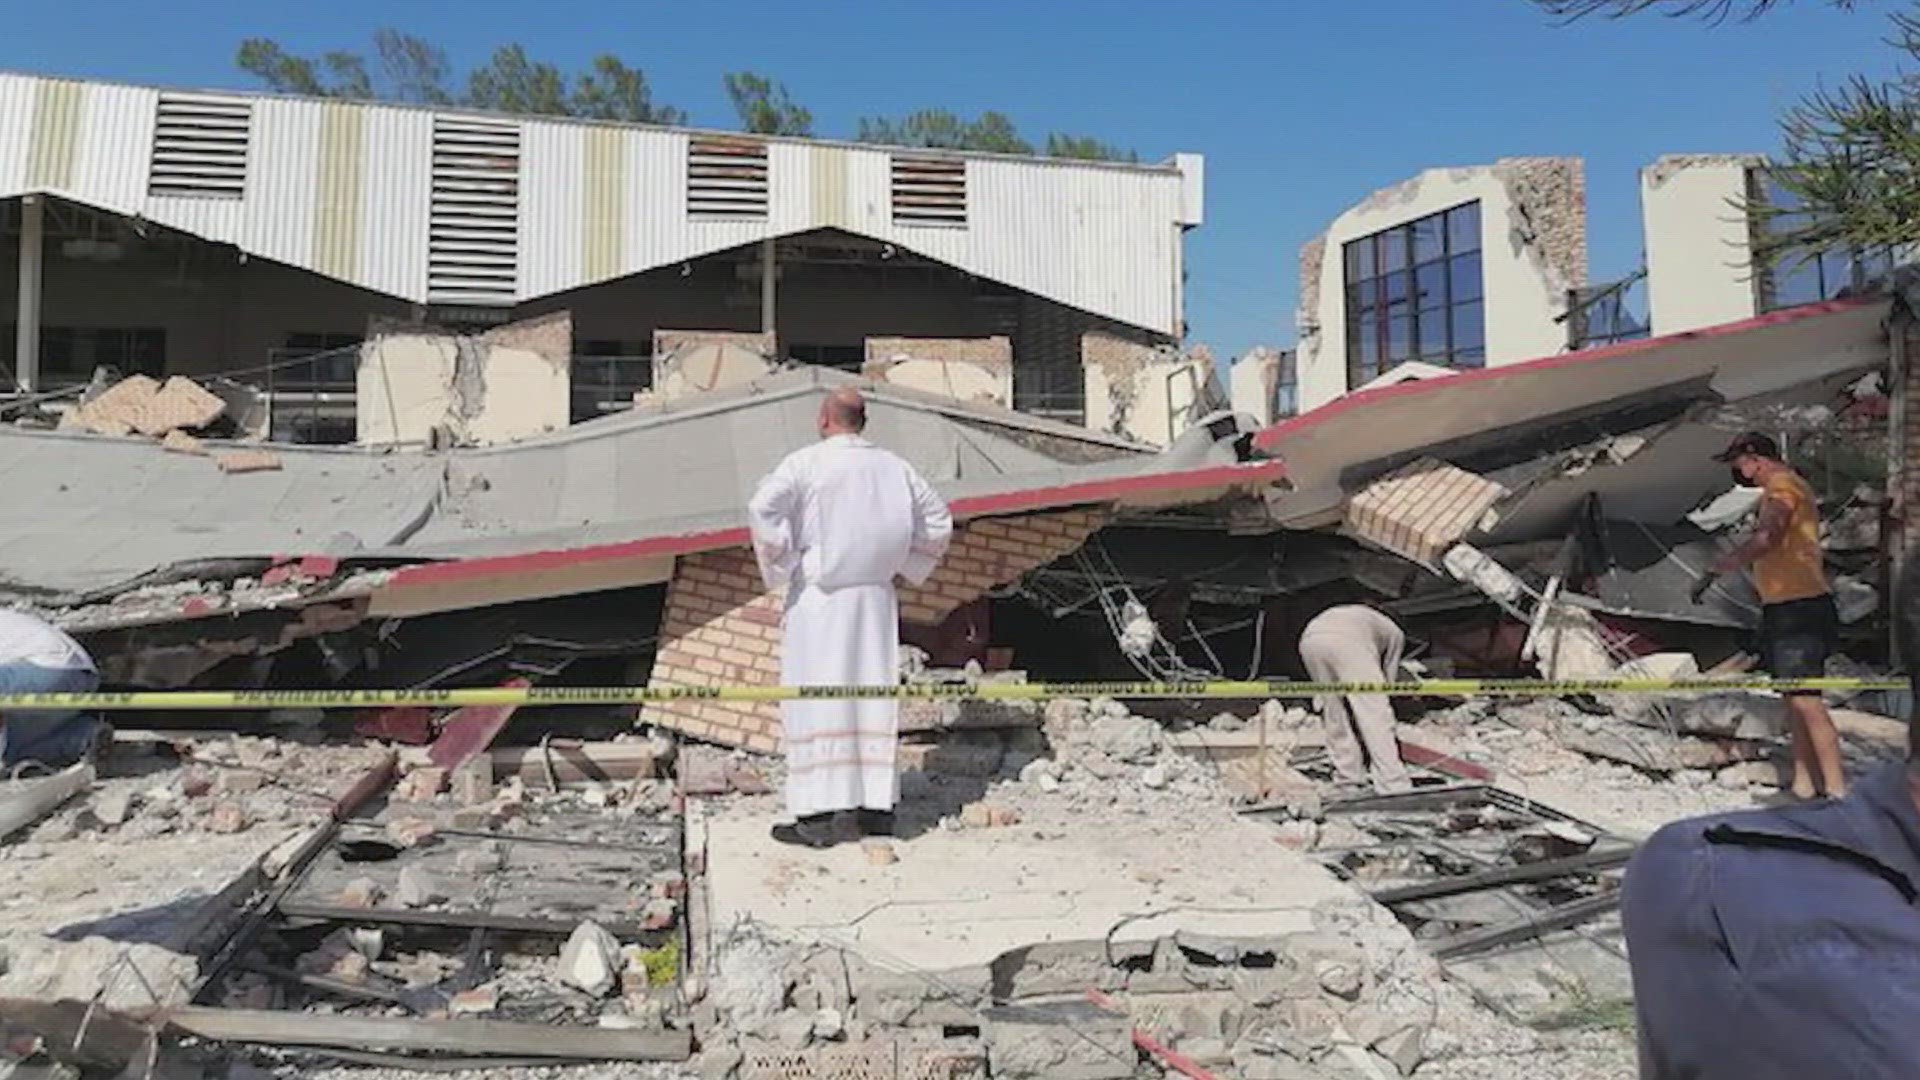 Mexican officials say at least 100 people were inside when the roof caved in during Sunday morning mass.